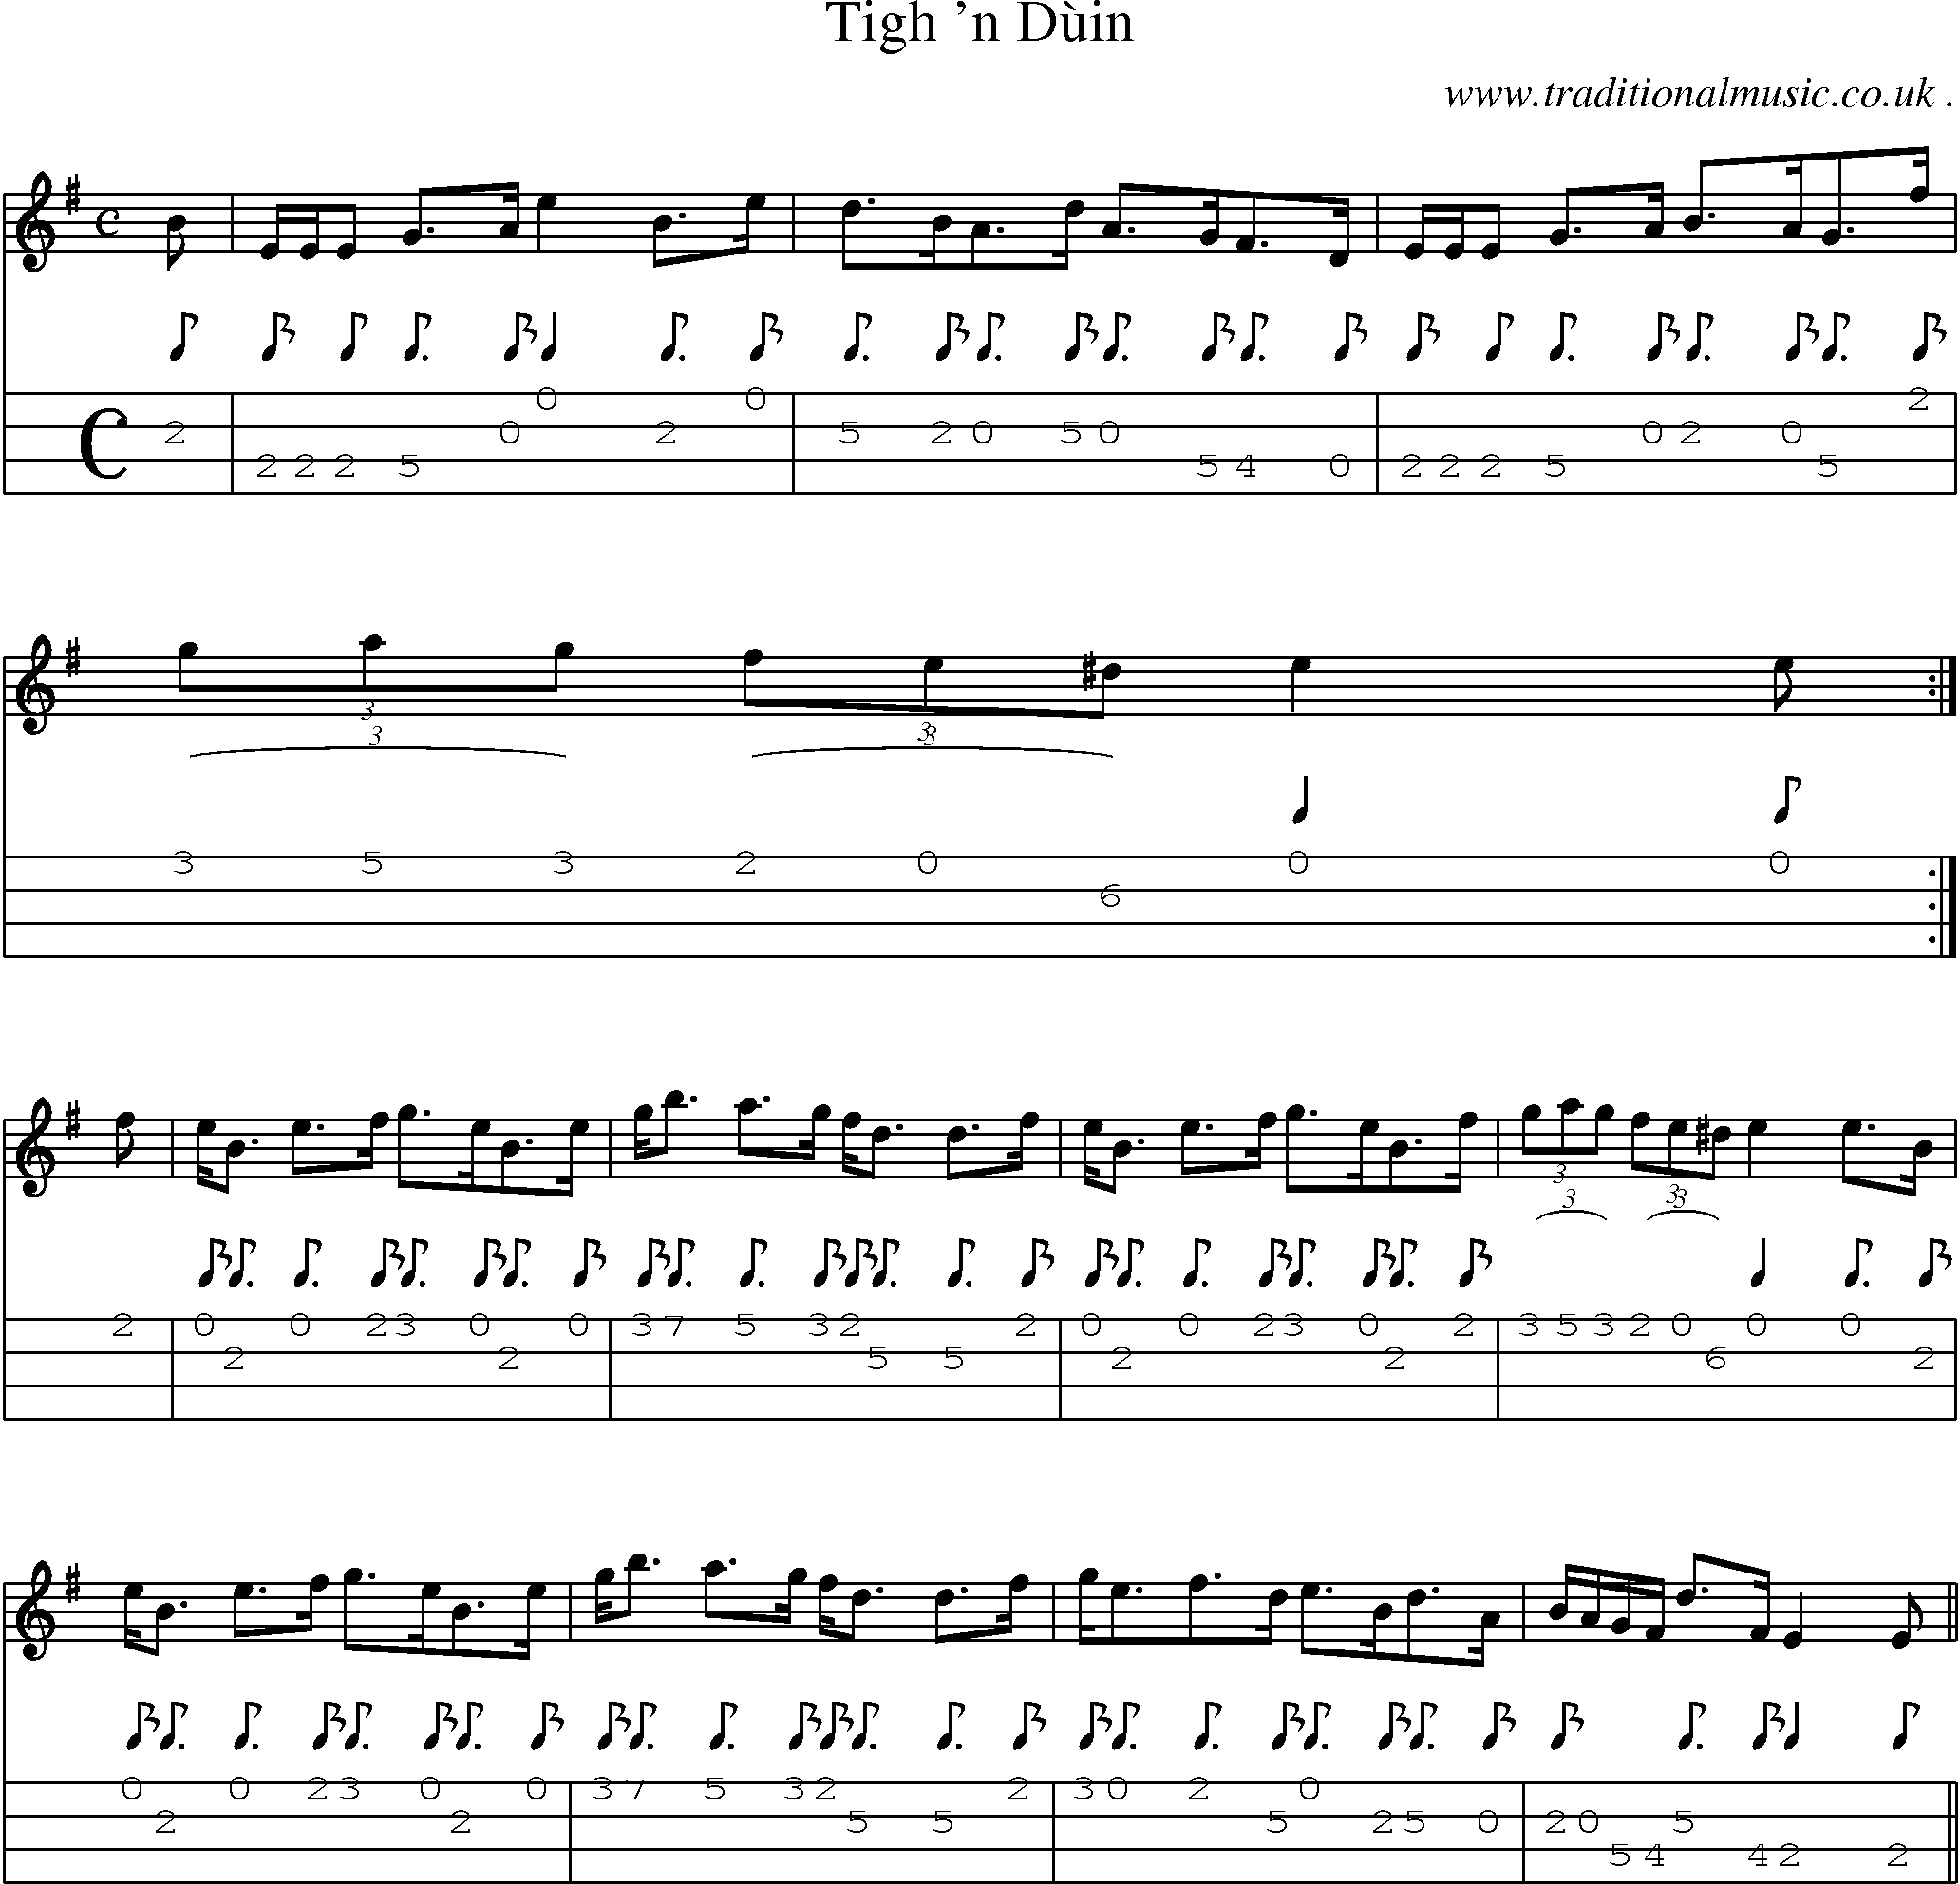 Sheet-music  score, Chords and Mandolin Tabs for Tigh N Duin